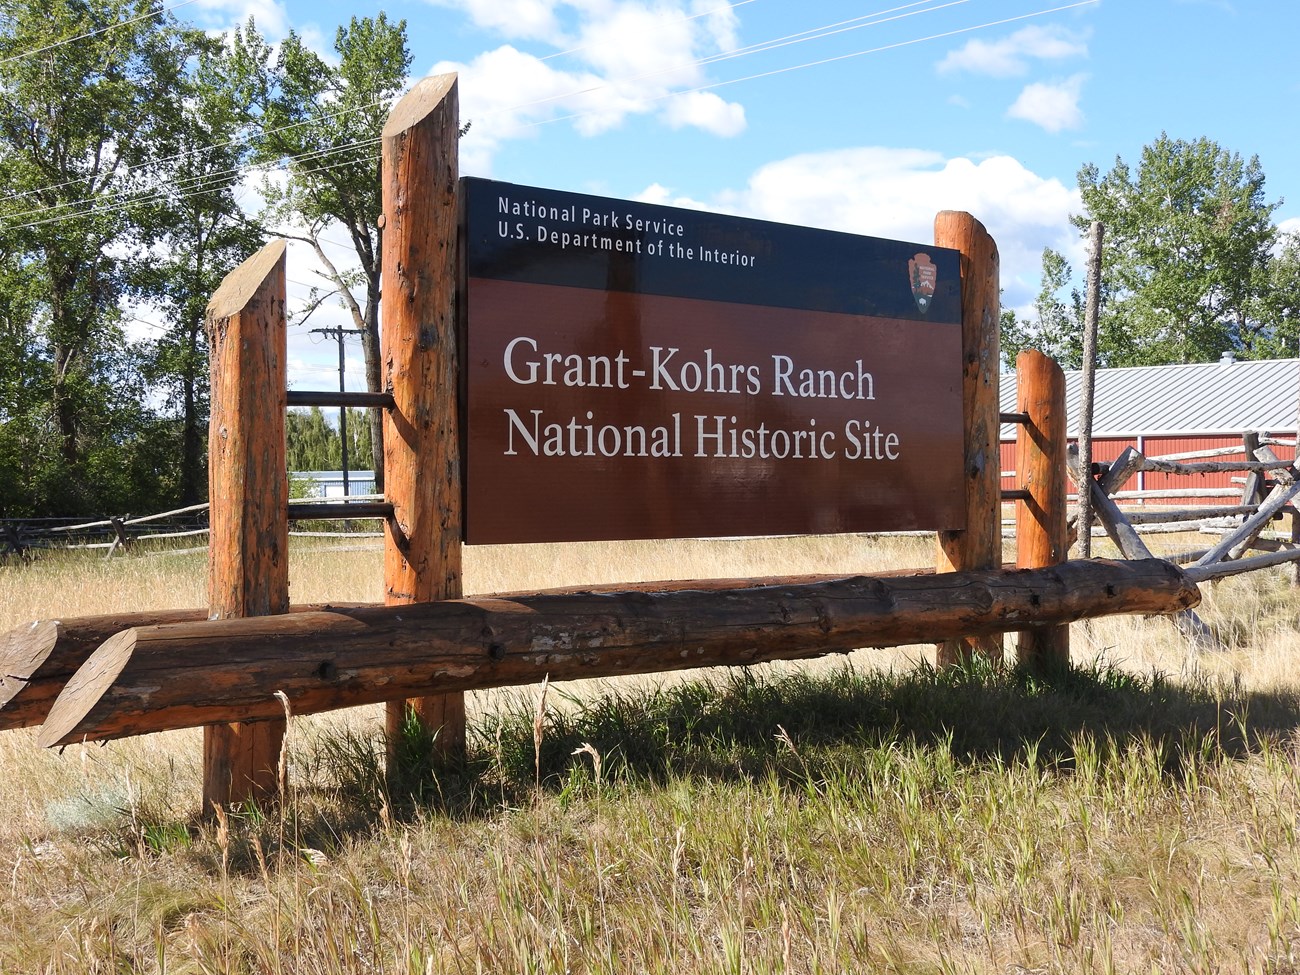 Large sign, NPS black band on top, arrowhead symbol on right, "Grant-Kohrs Ranch National Historic Site" in white text on brown background